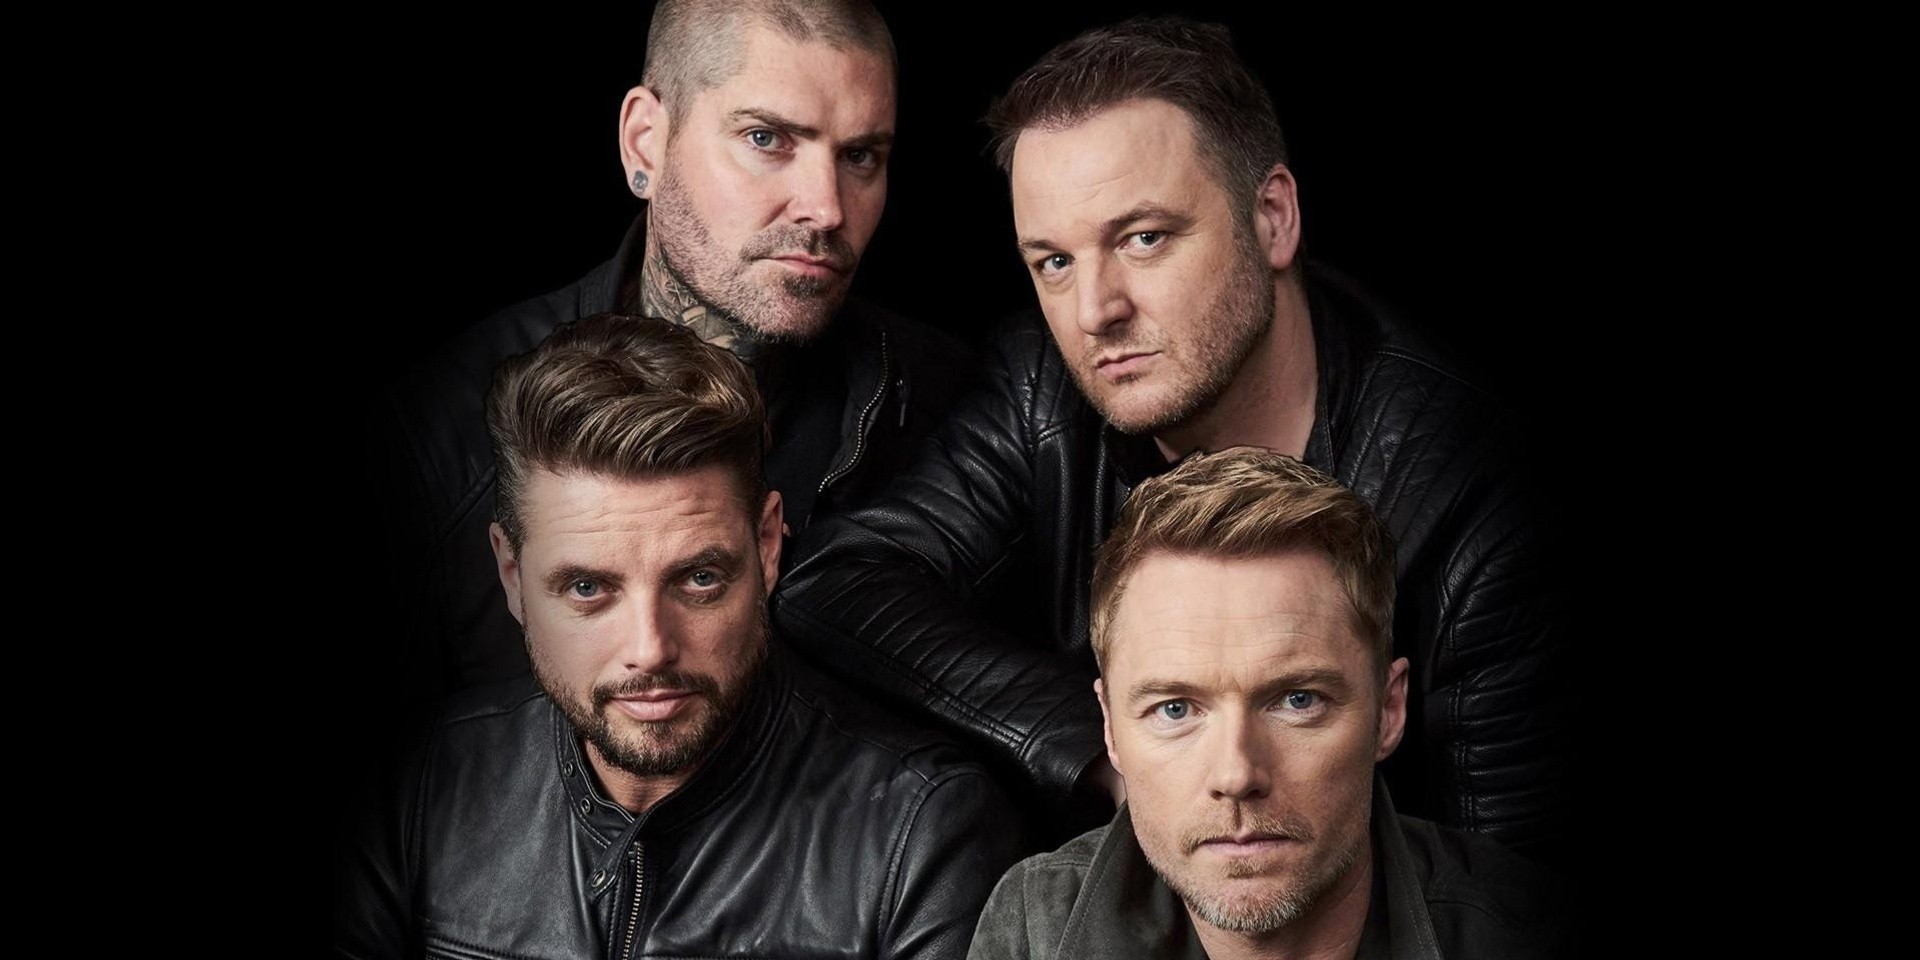 Boyzone's Mikey Graham on their latest album, advice to budding musicians and performing in Singapore for the last time